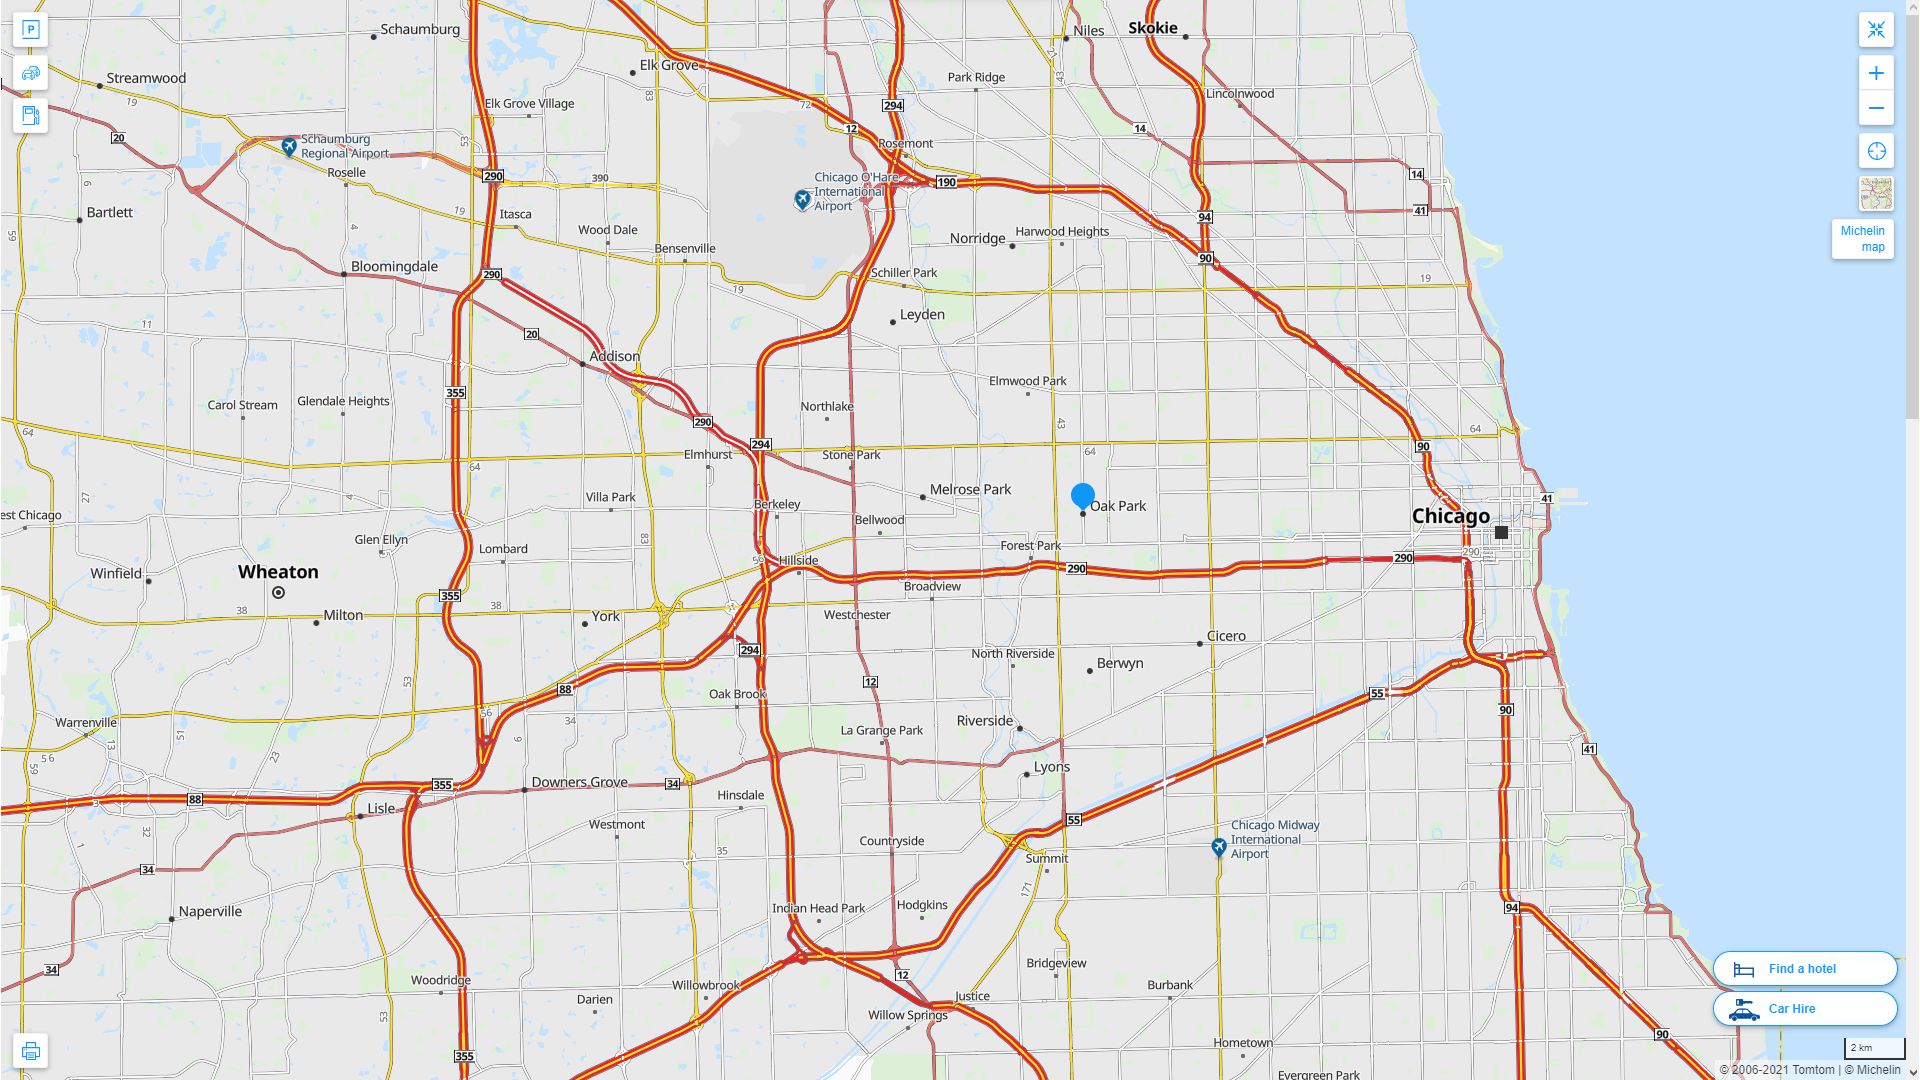 Oak Park illinois Highway and Road Map